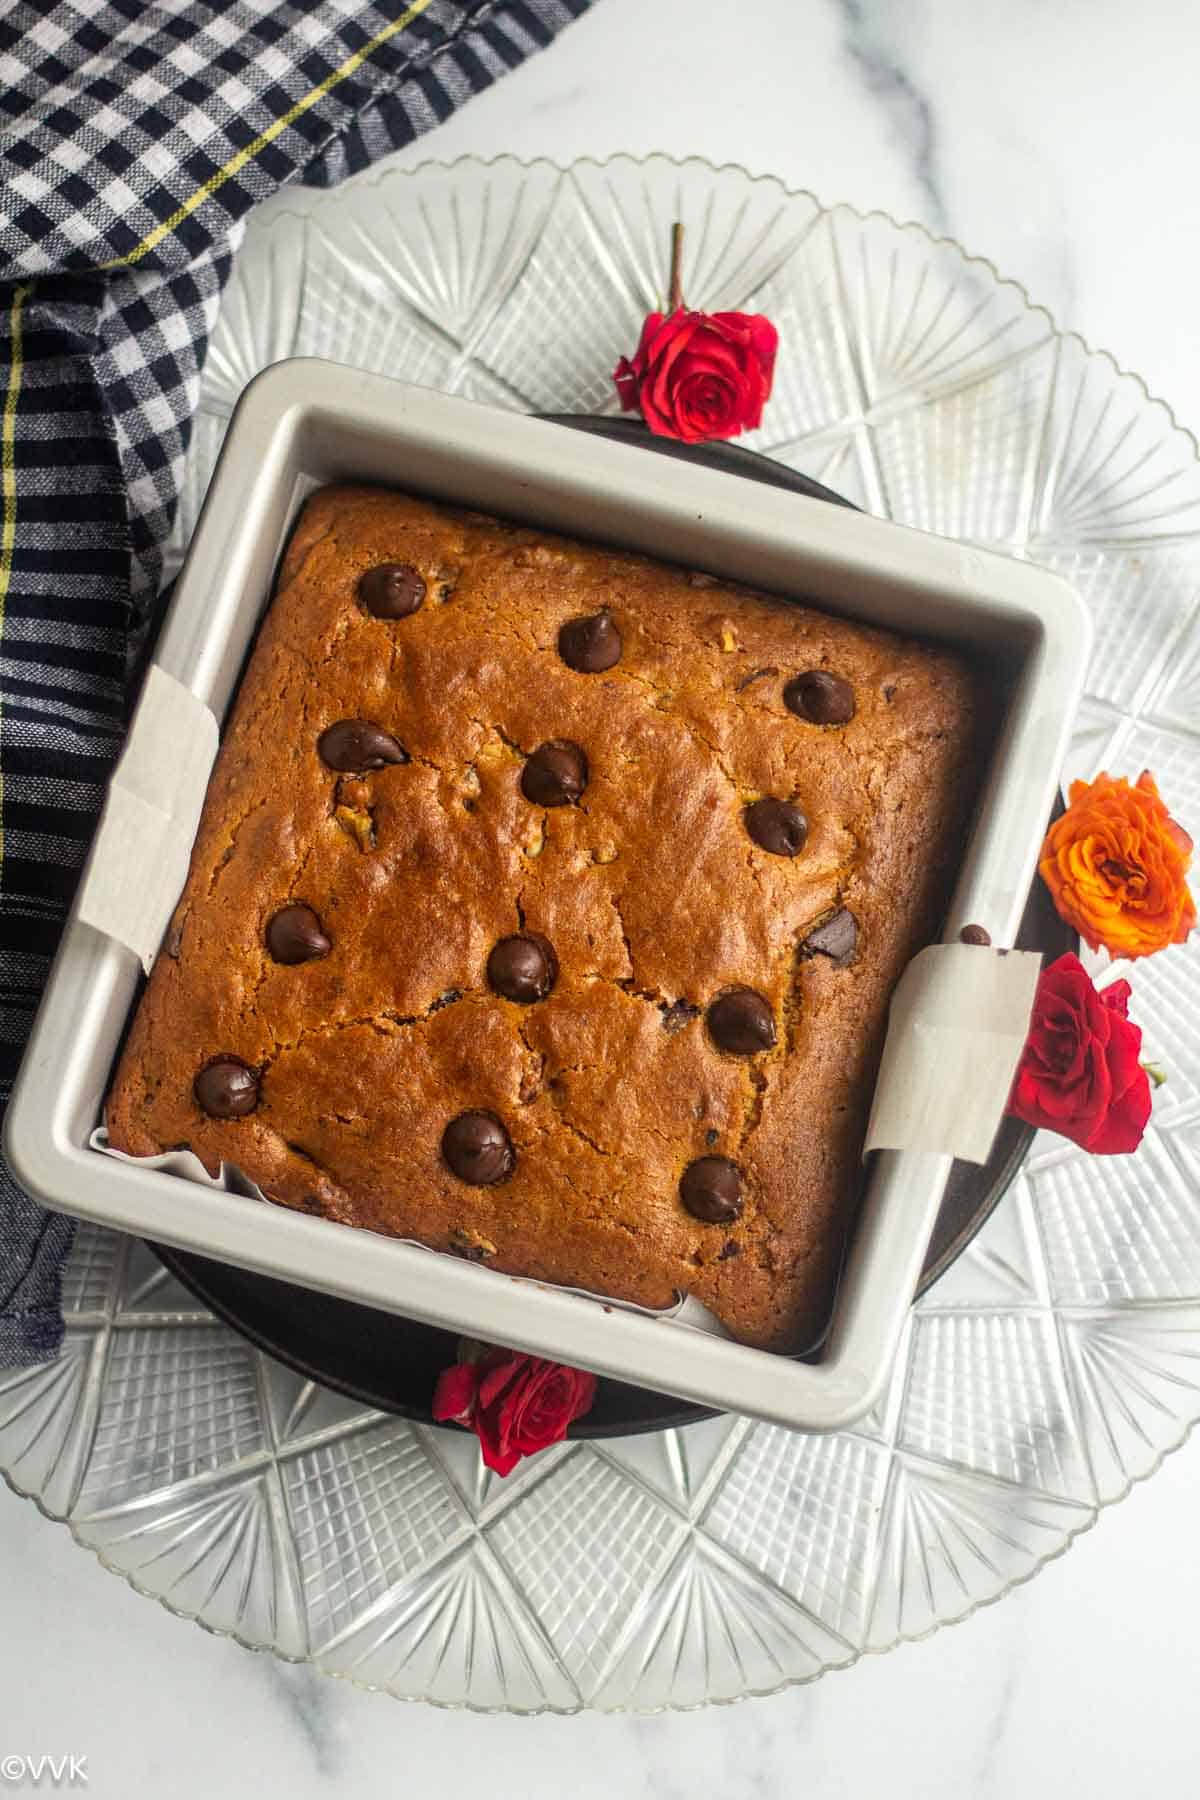 chocolate chip cake right out of oven in the pan with roses on the side